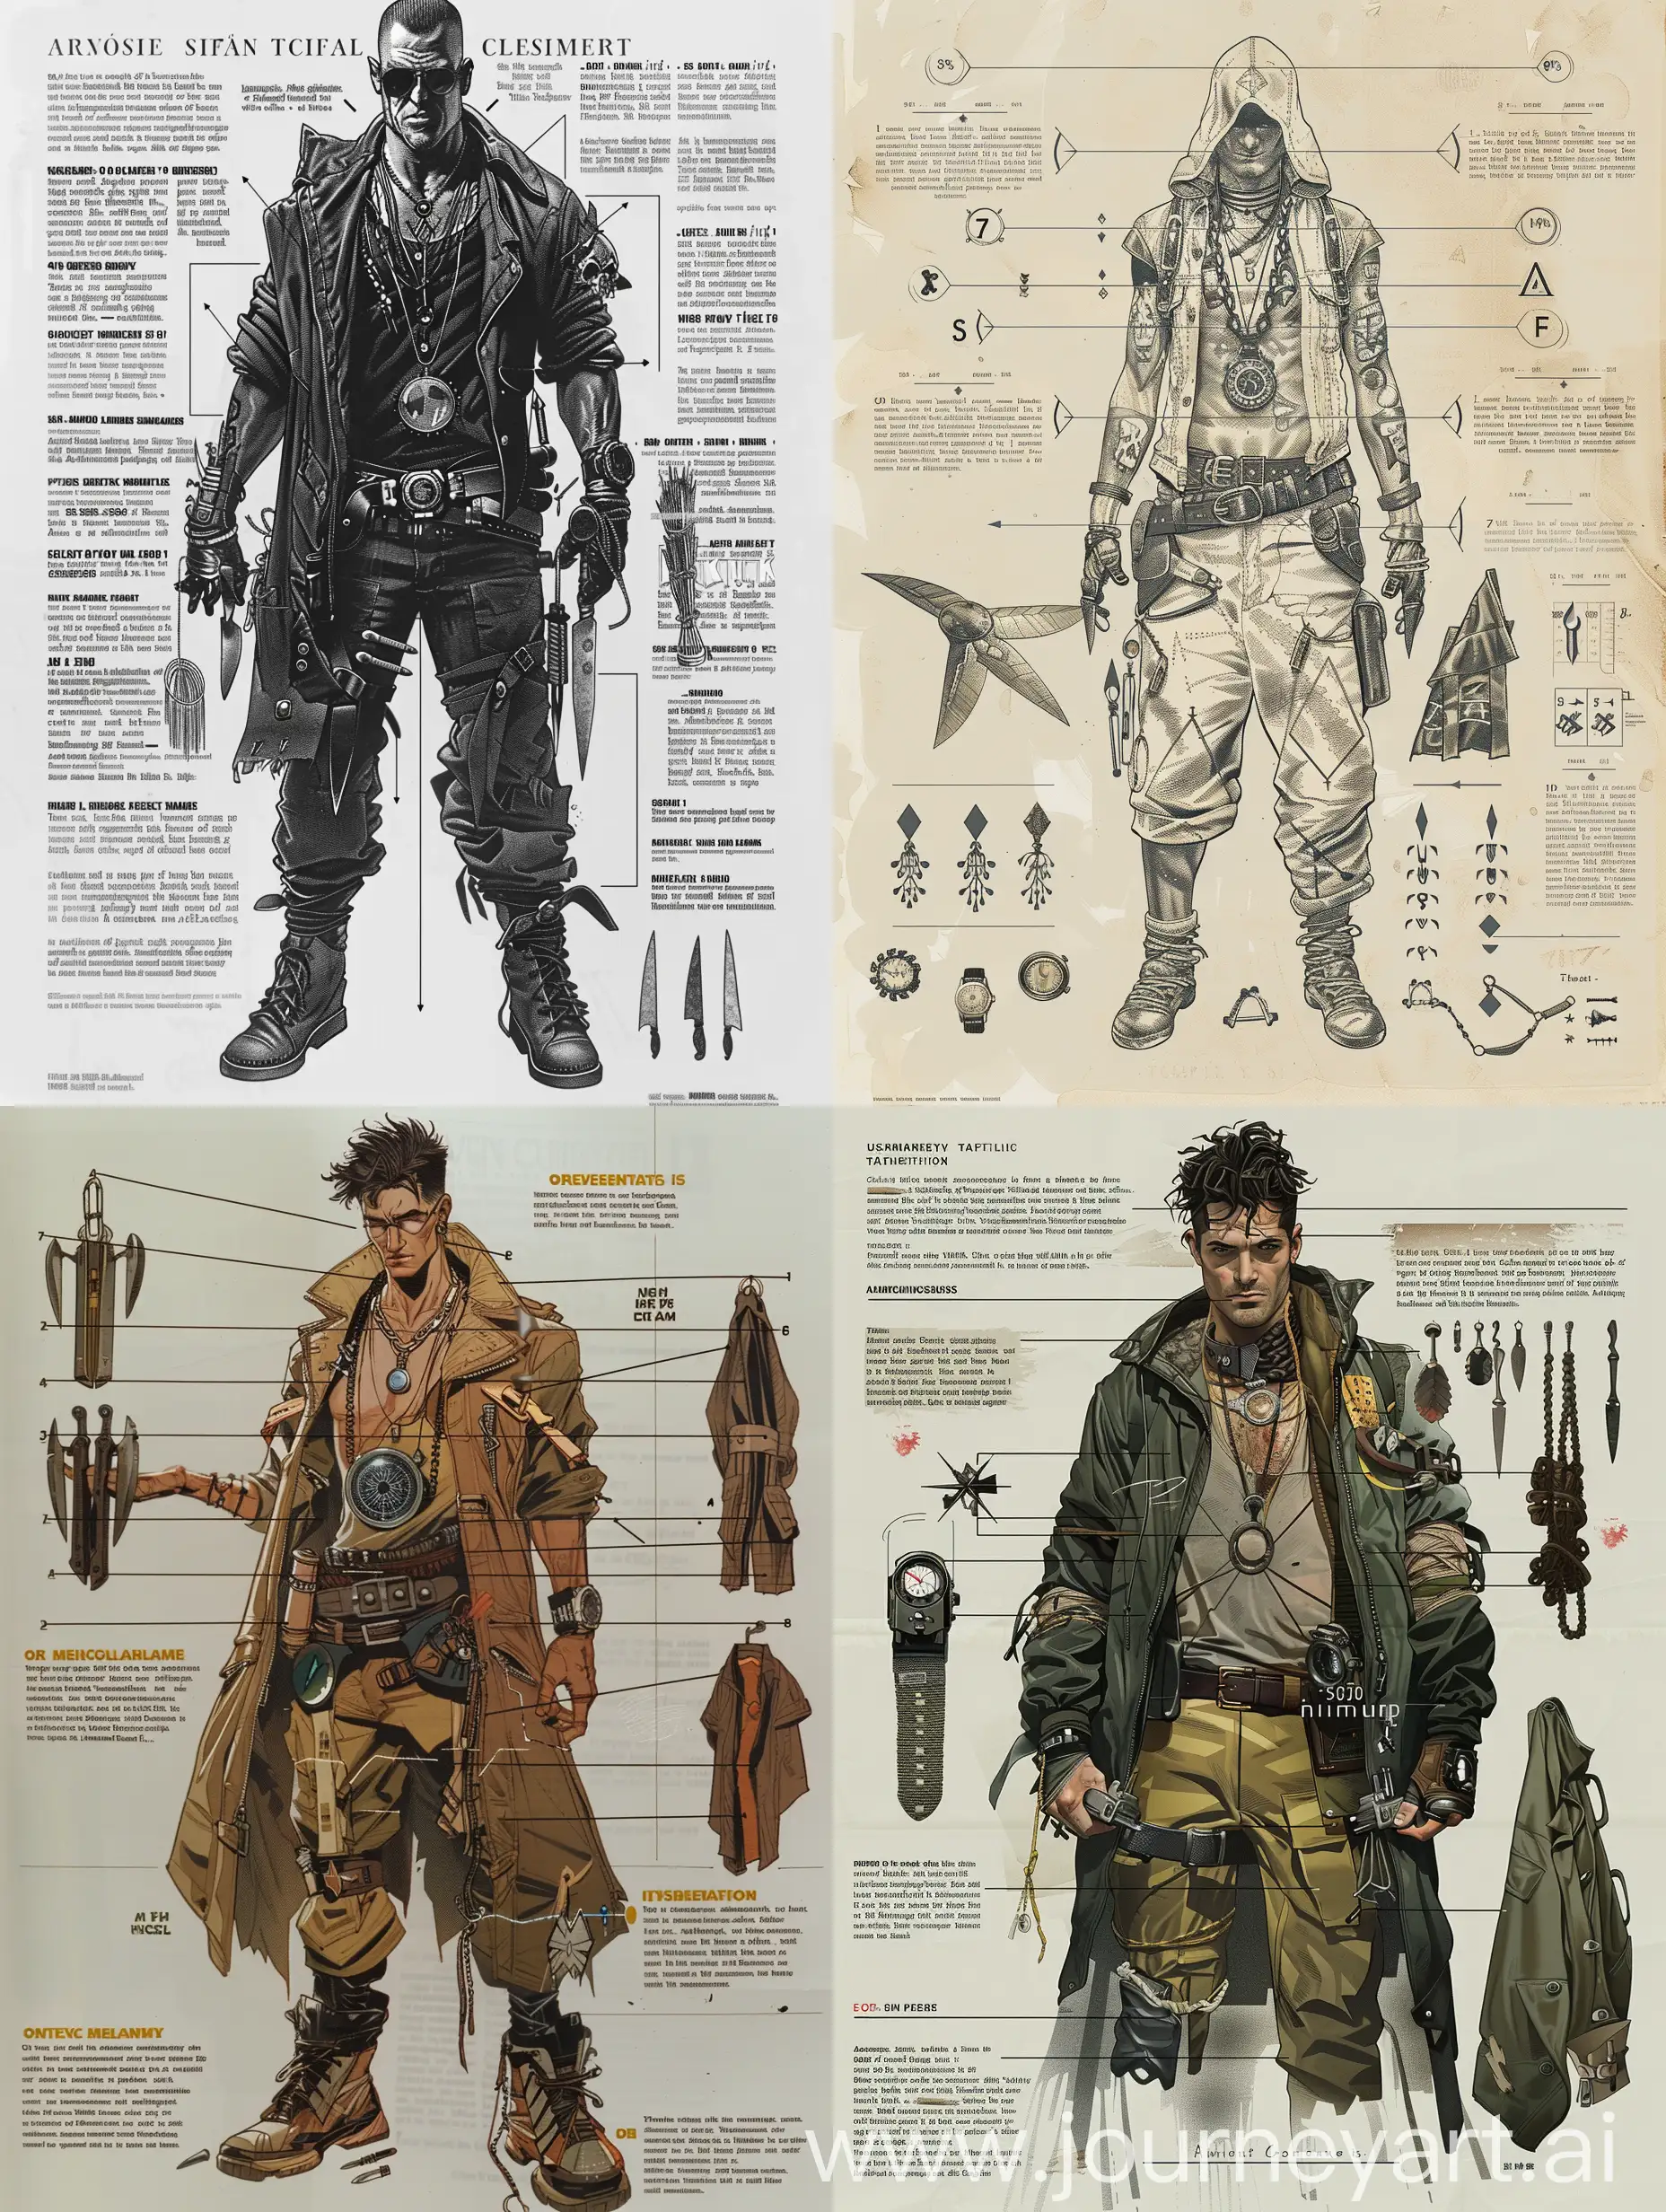 magazine, statistics, lines pointing to clothing and gear, detailed character a modern occultist, a man from America, lots of details, from the nineties, throwing knives on his belt, a watch around his neck, watchmaker